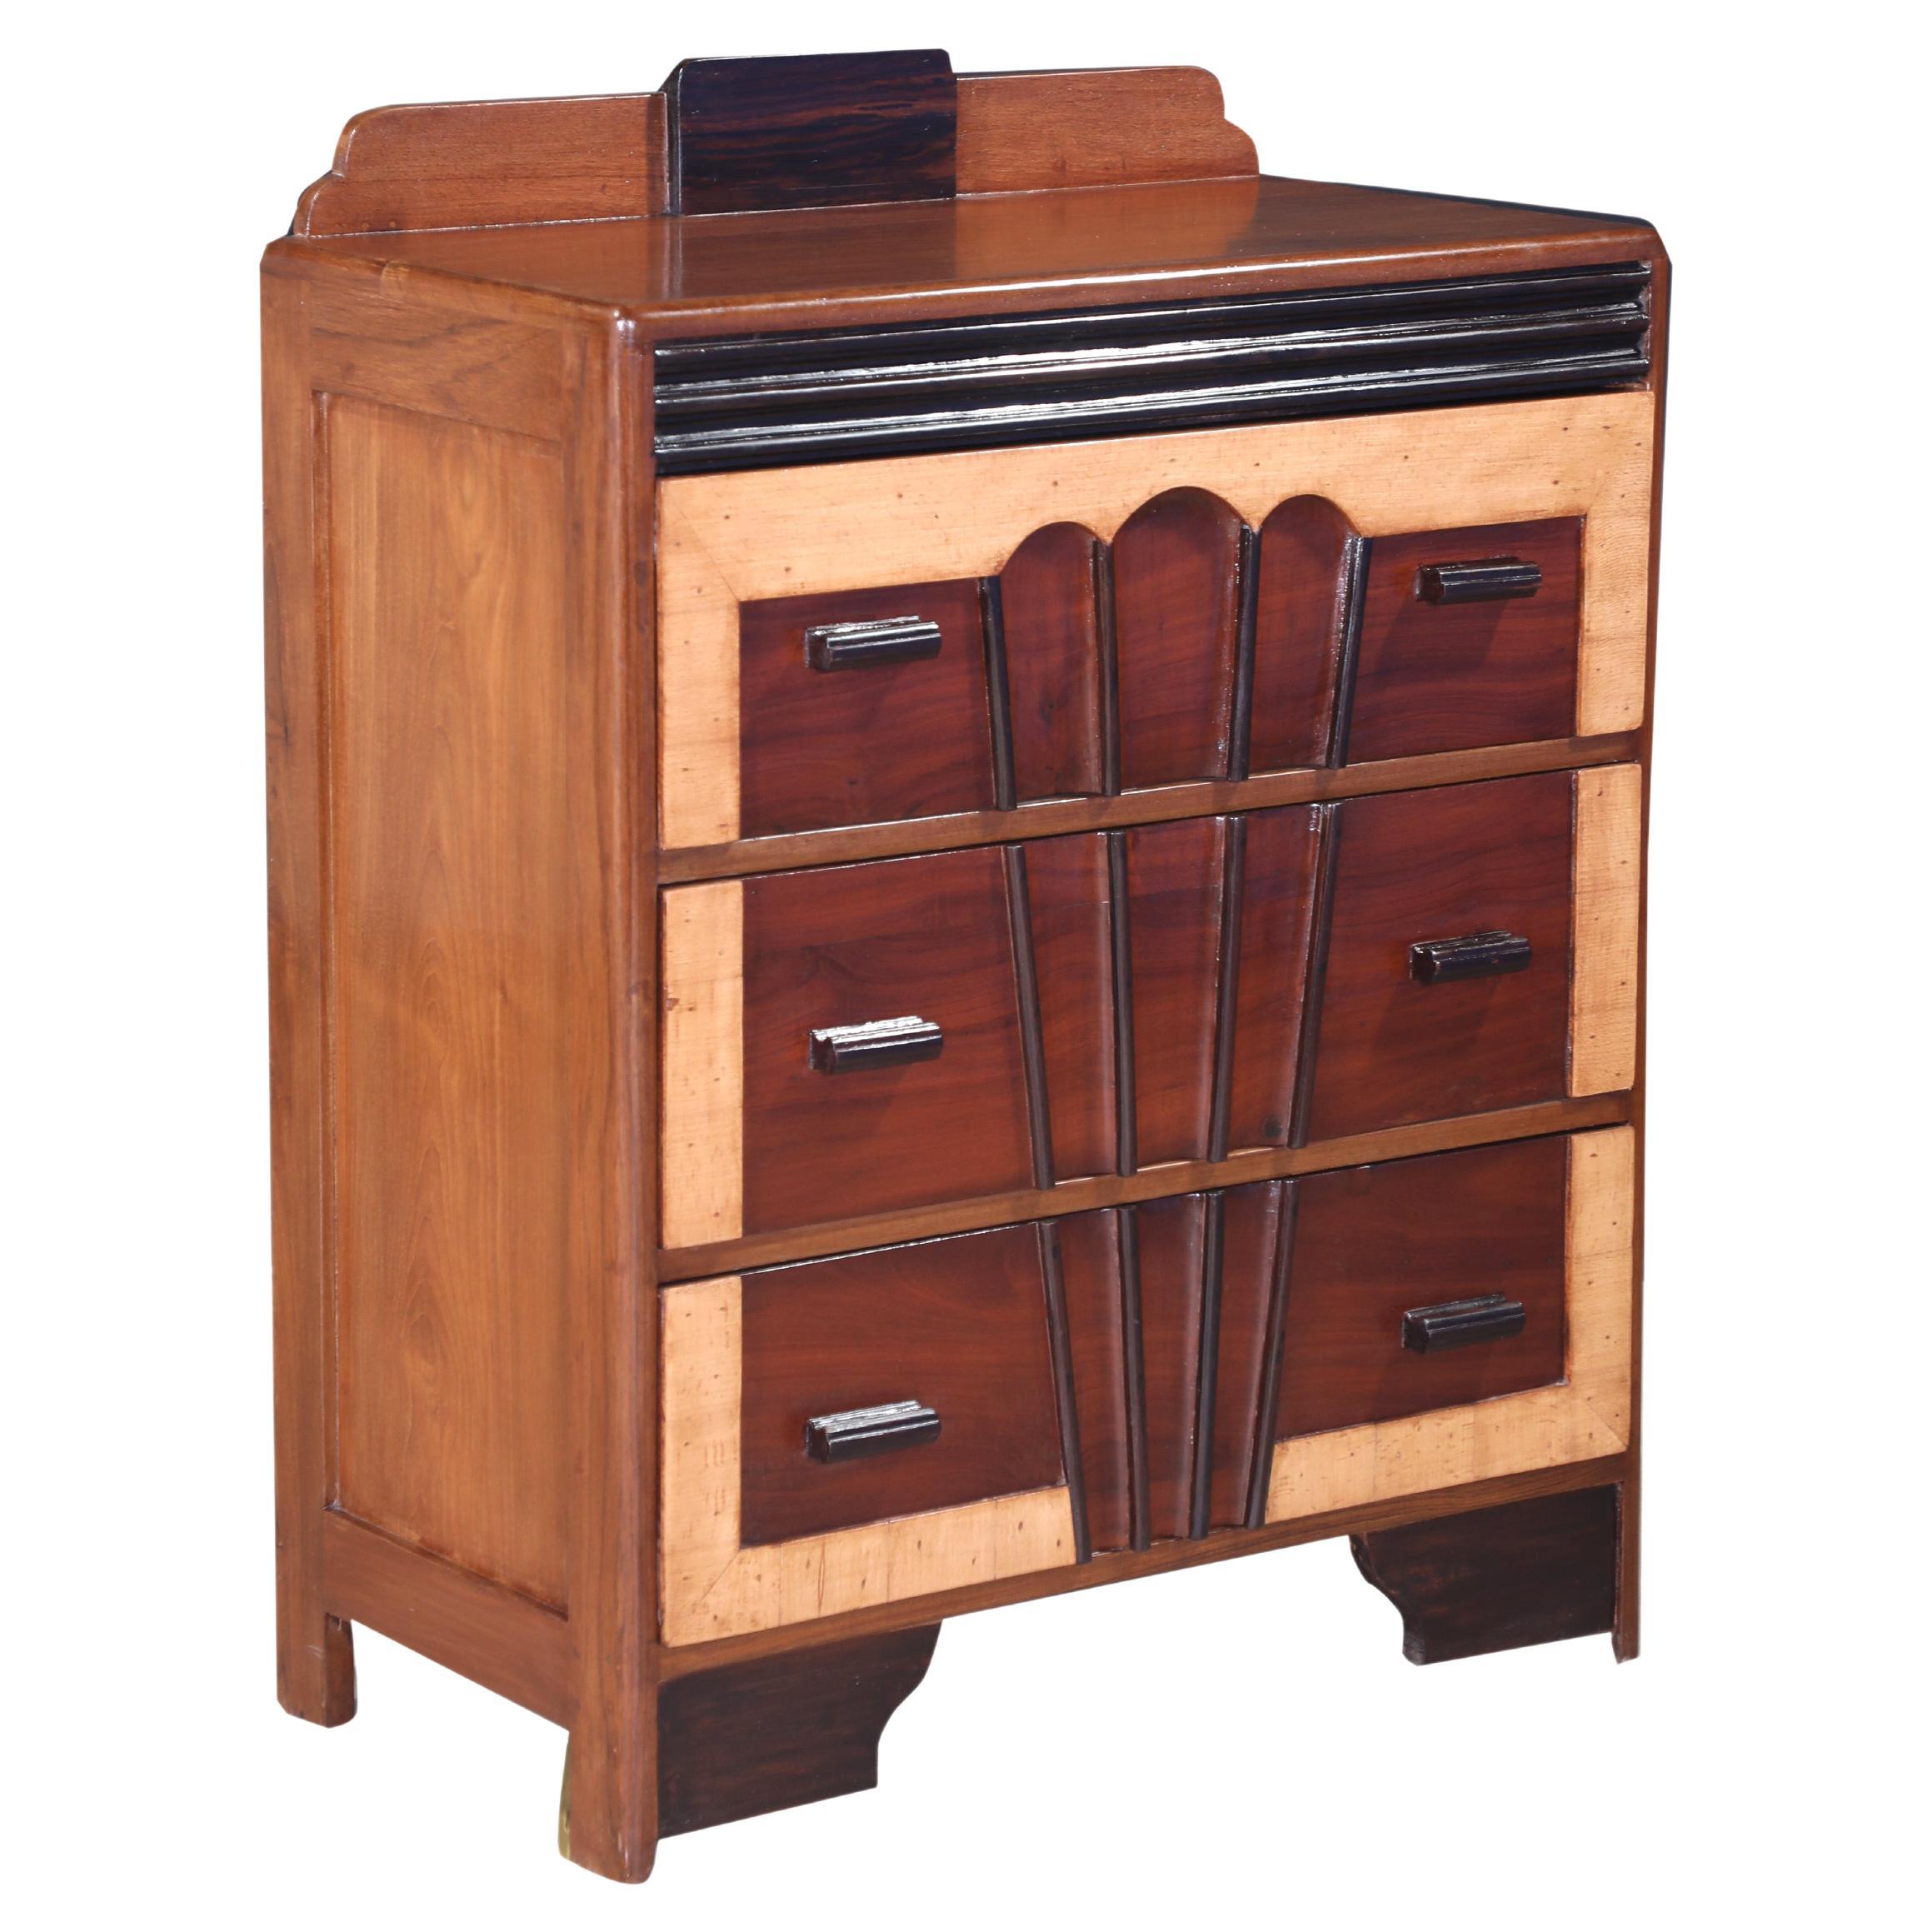 Late Art Deco Chest of Drawers, Dresser